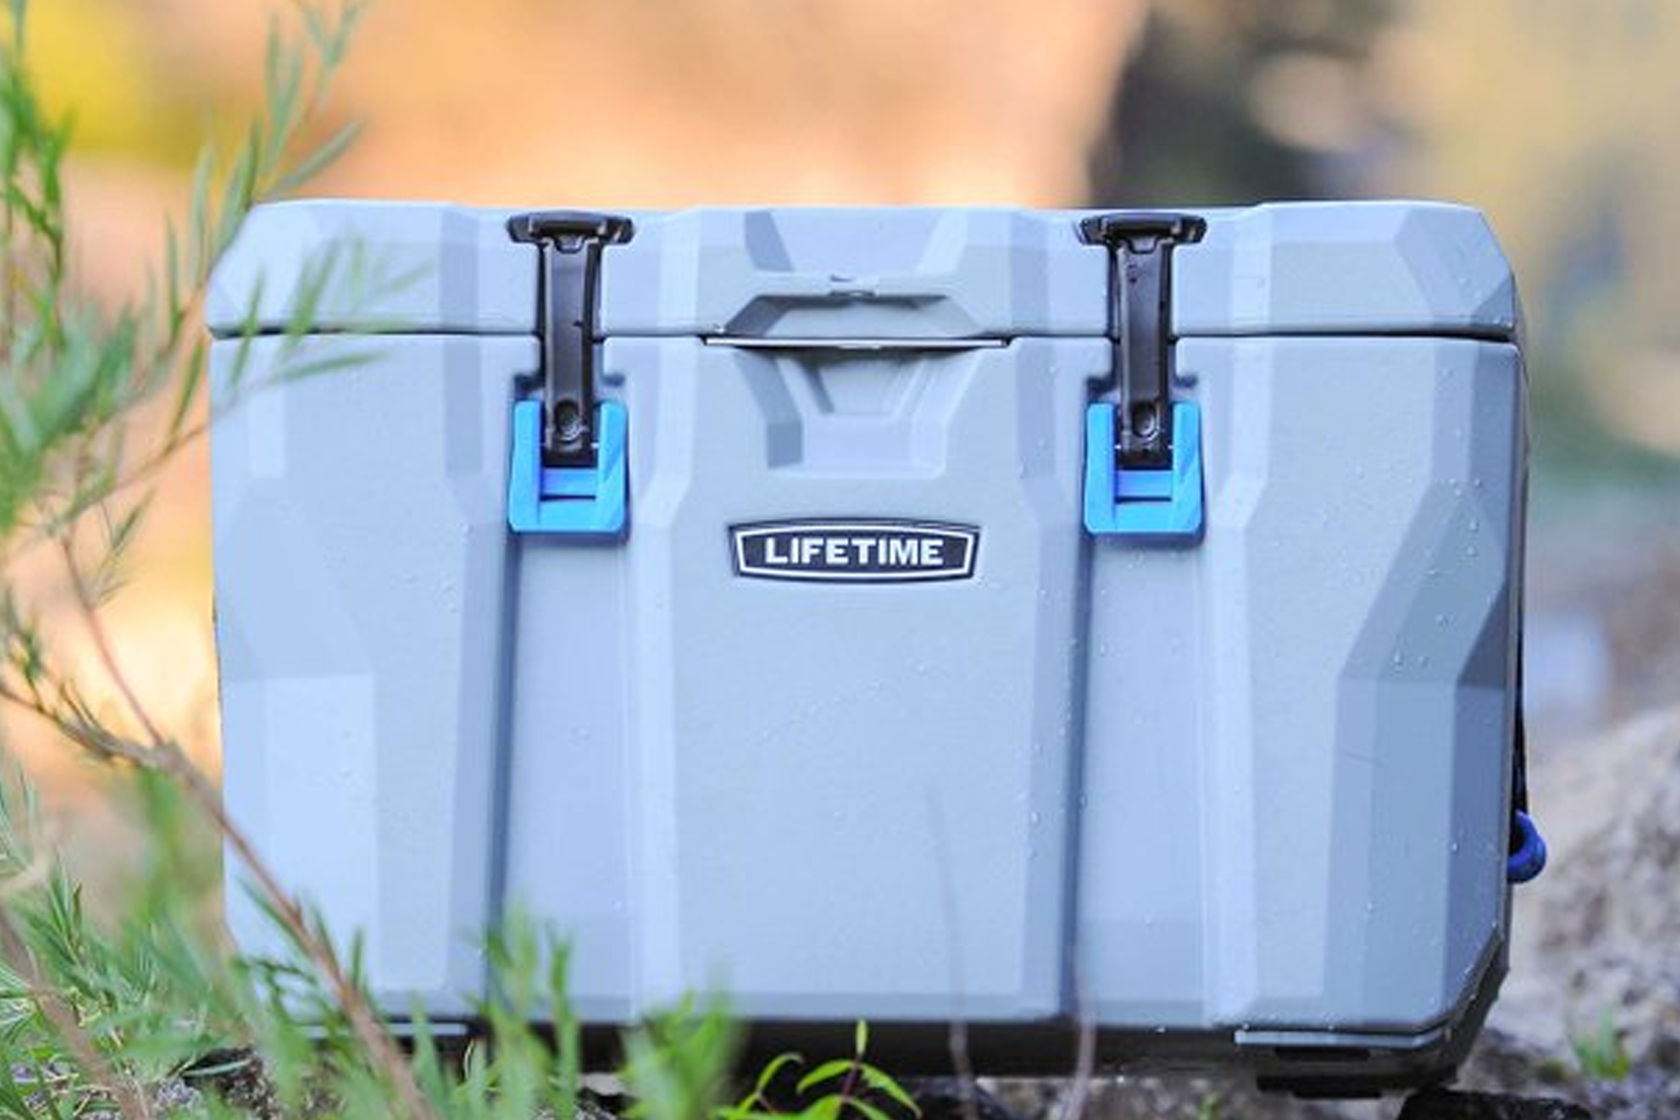 This high performance cooler can retain ice for 7 hot days (and is on sale)